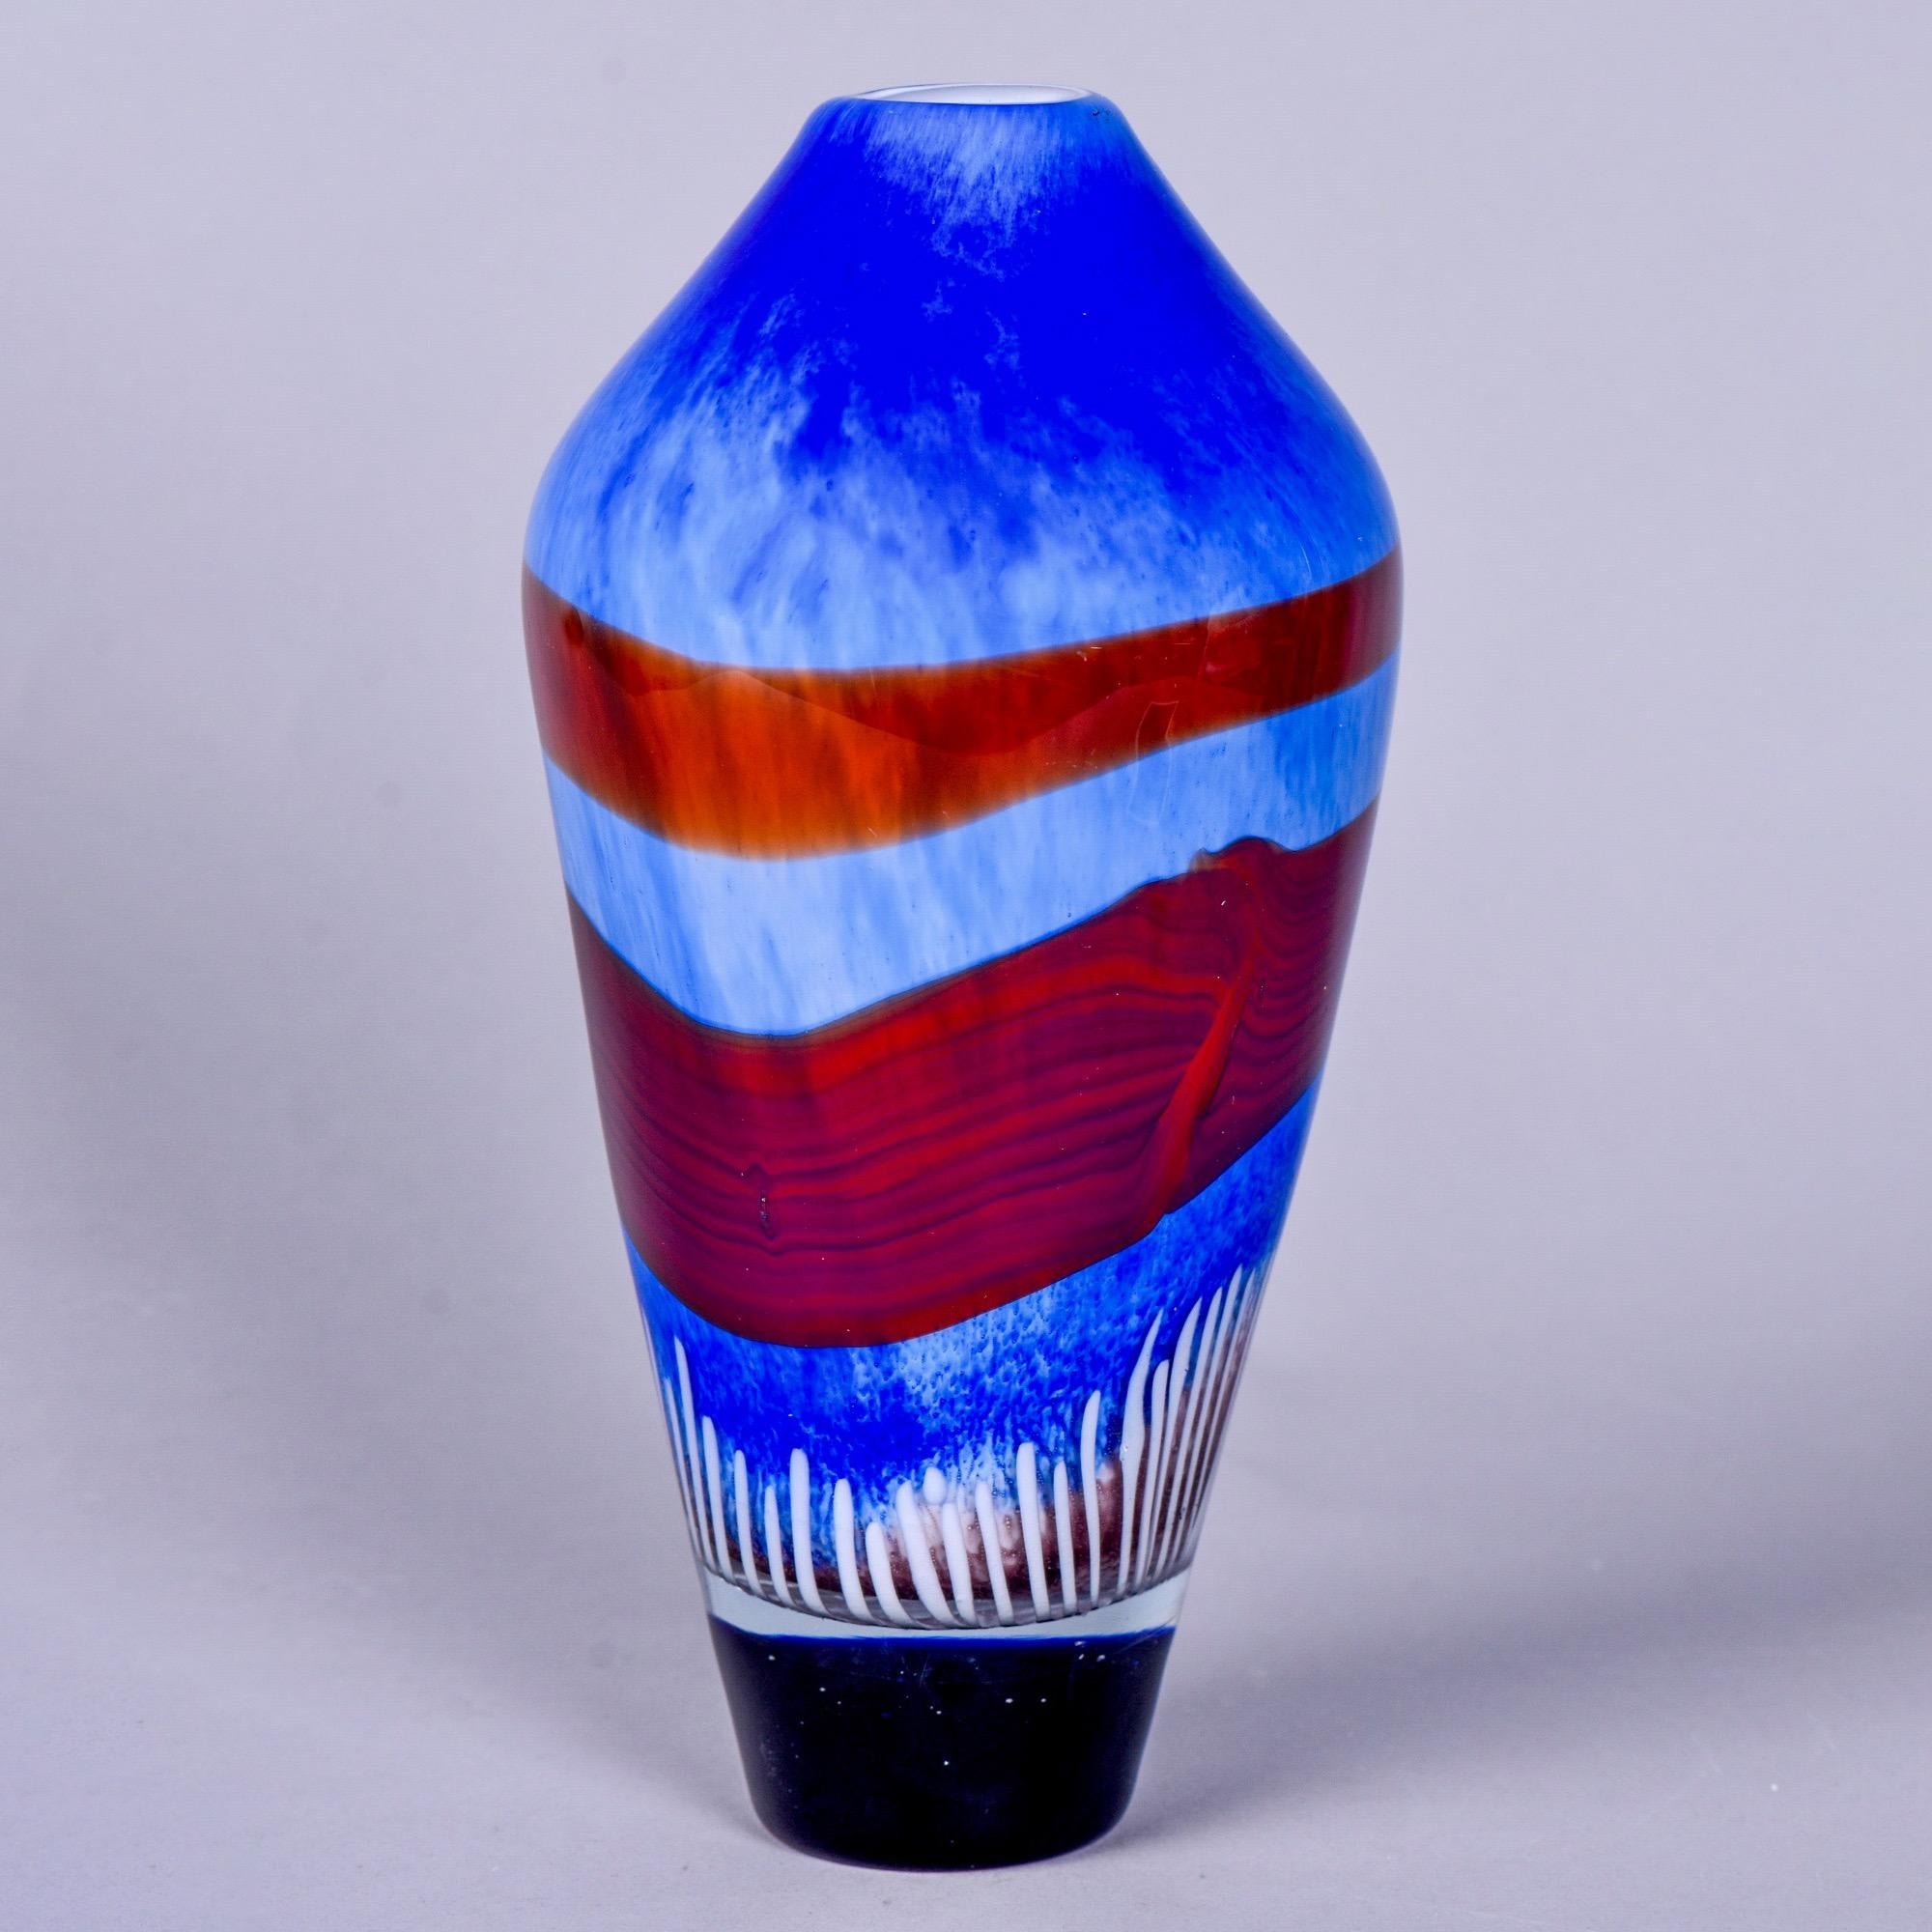 Italian Tall Murano Glass Vase in Azure Blue with Burgundy and White Accents